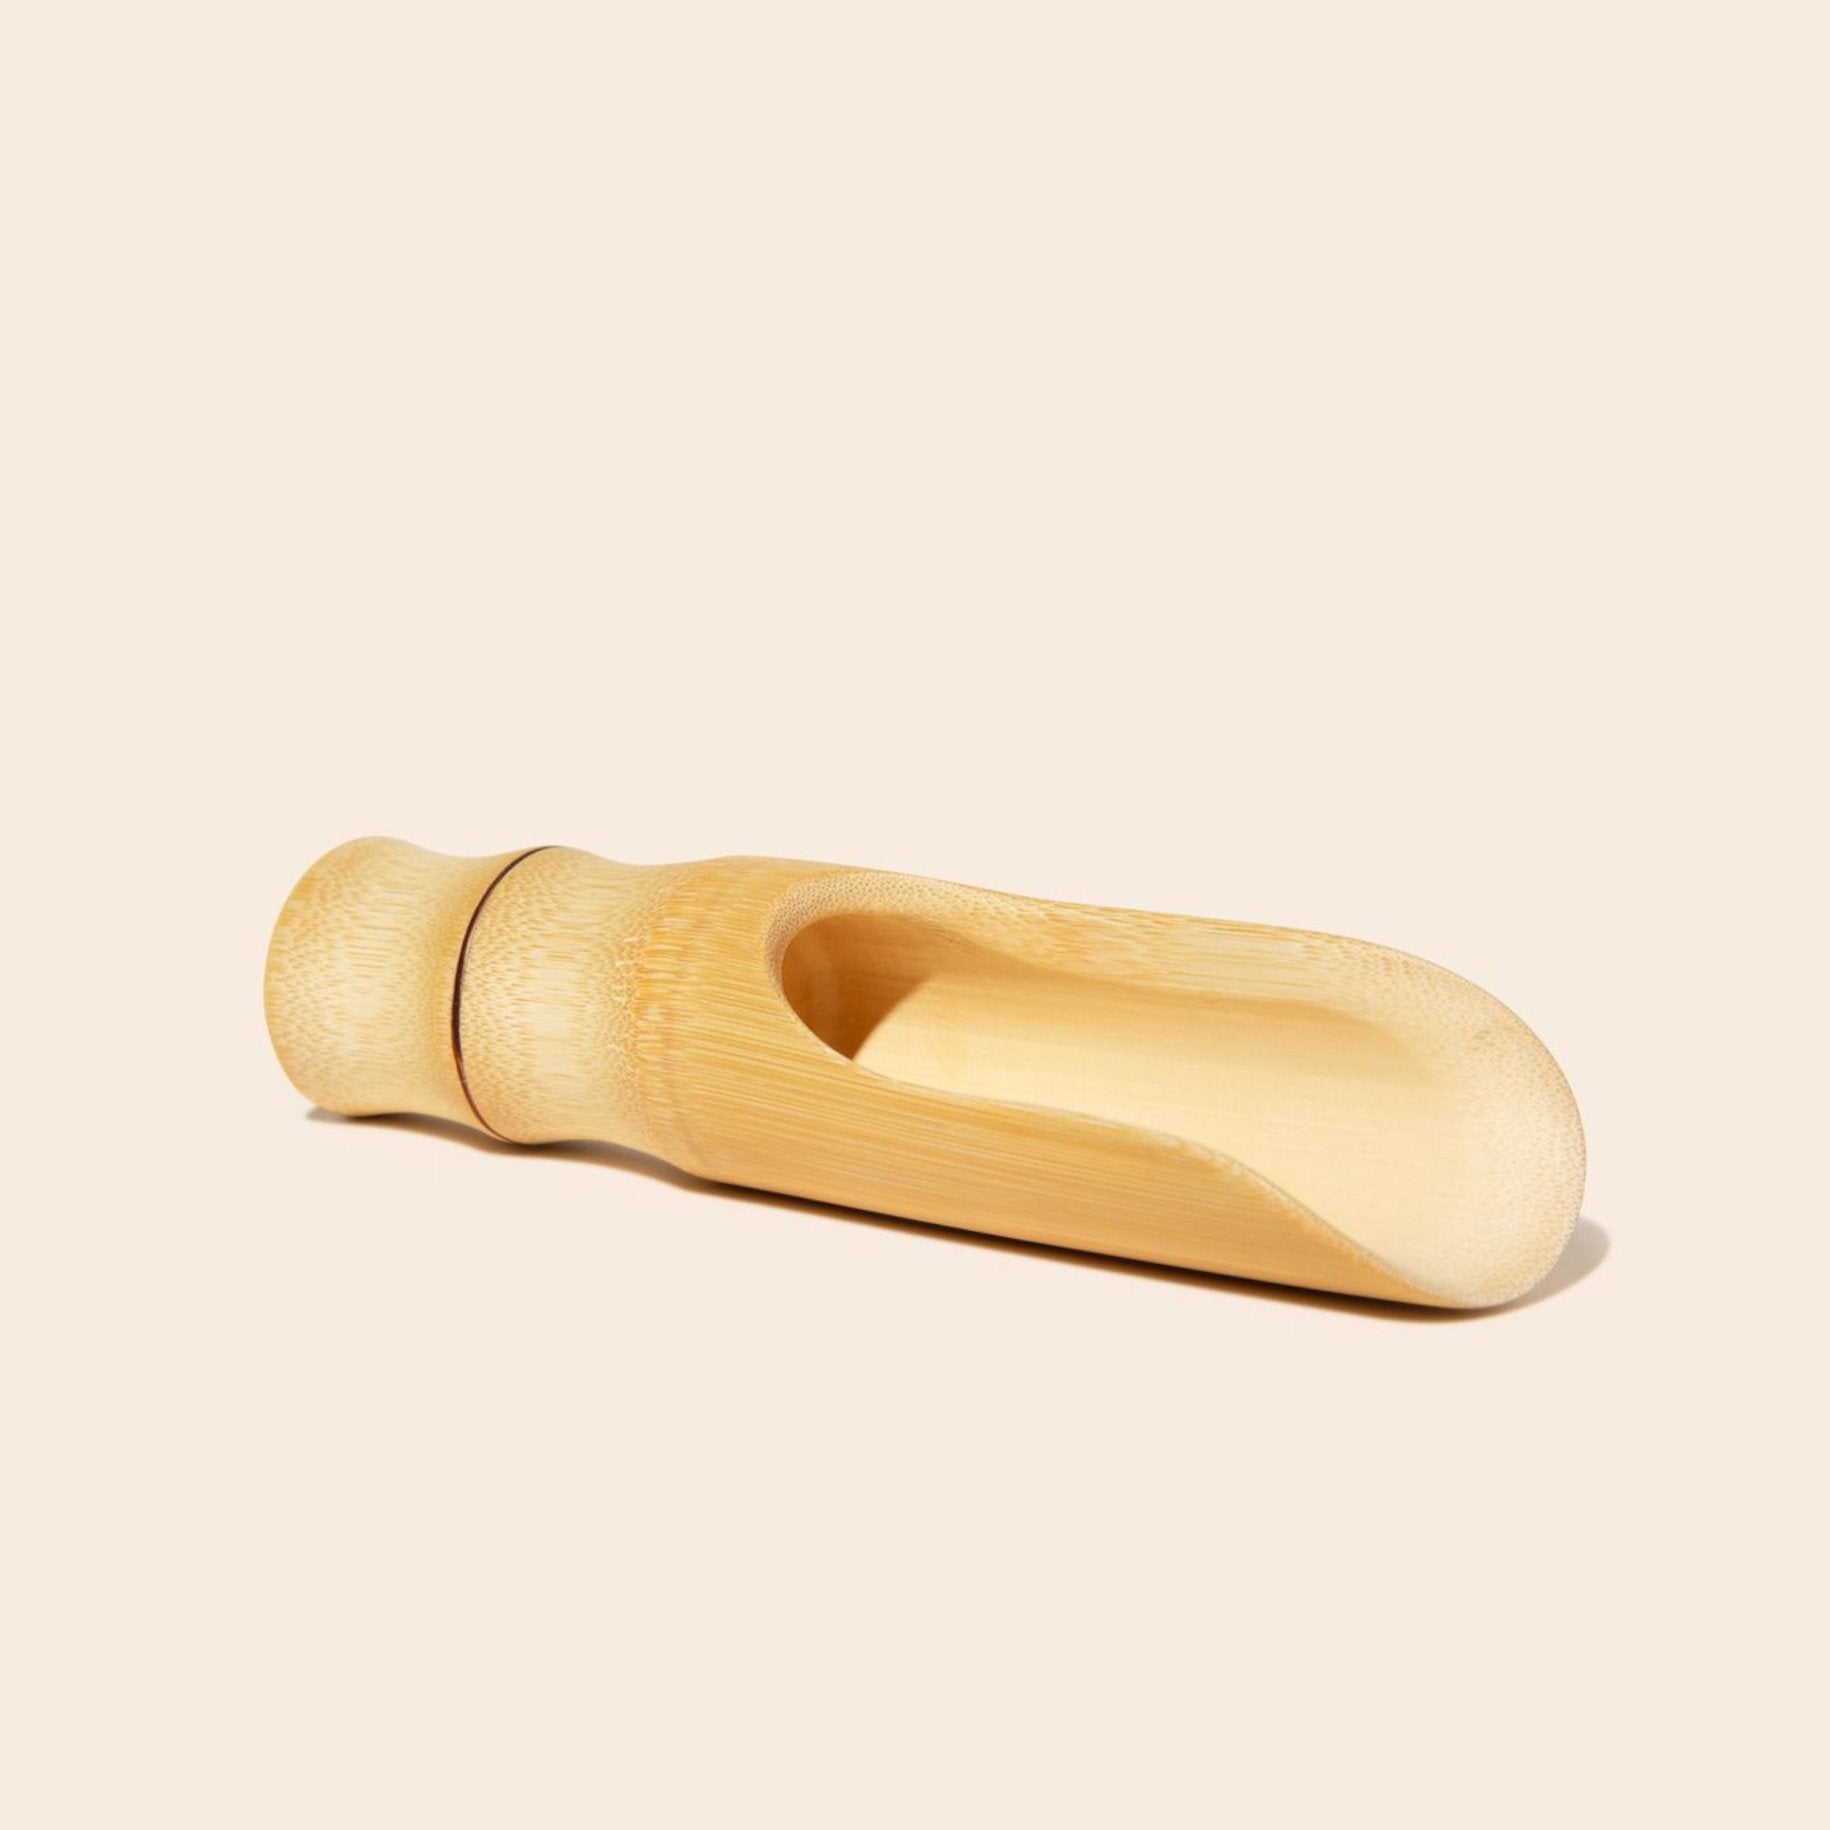 sustainable, zero waste, earth-friendly, plastic-free Bamboo Scoop | Wide Scoop - Bamboo Switch